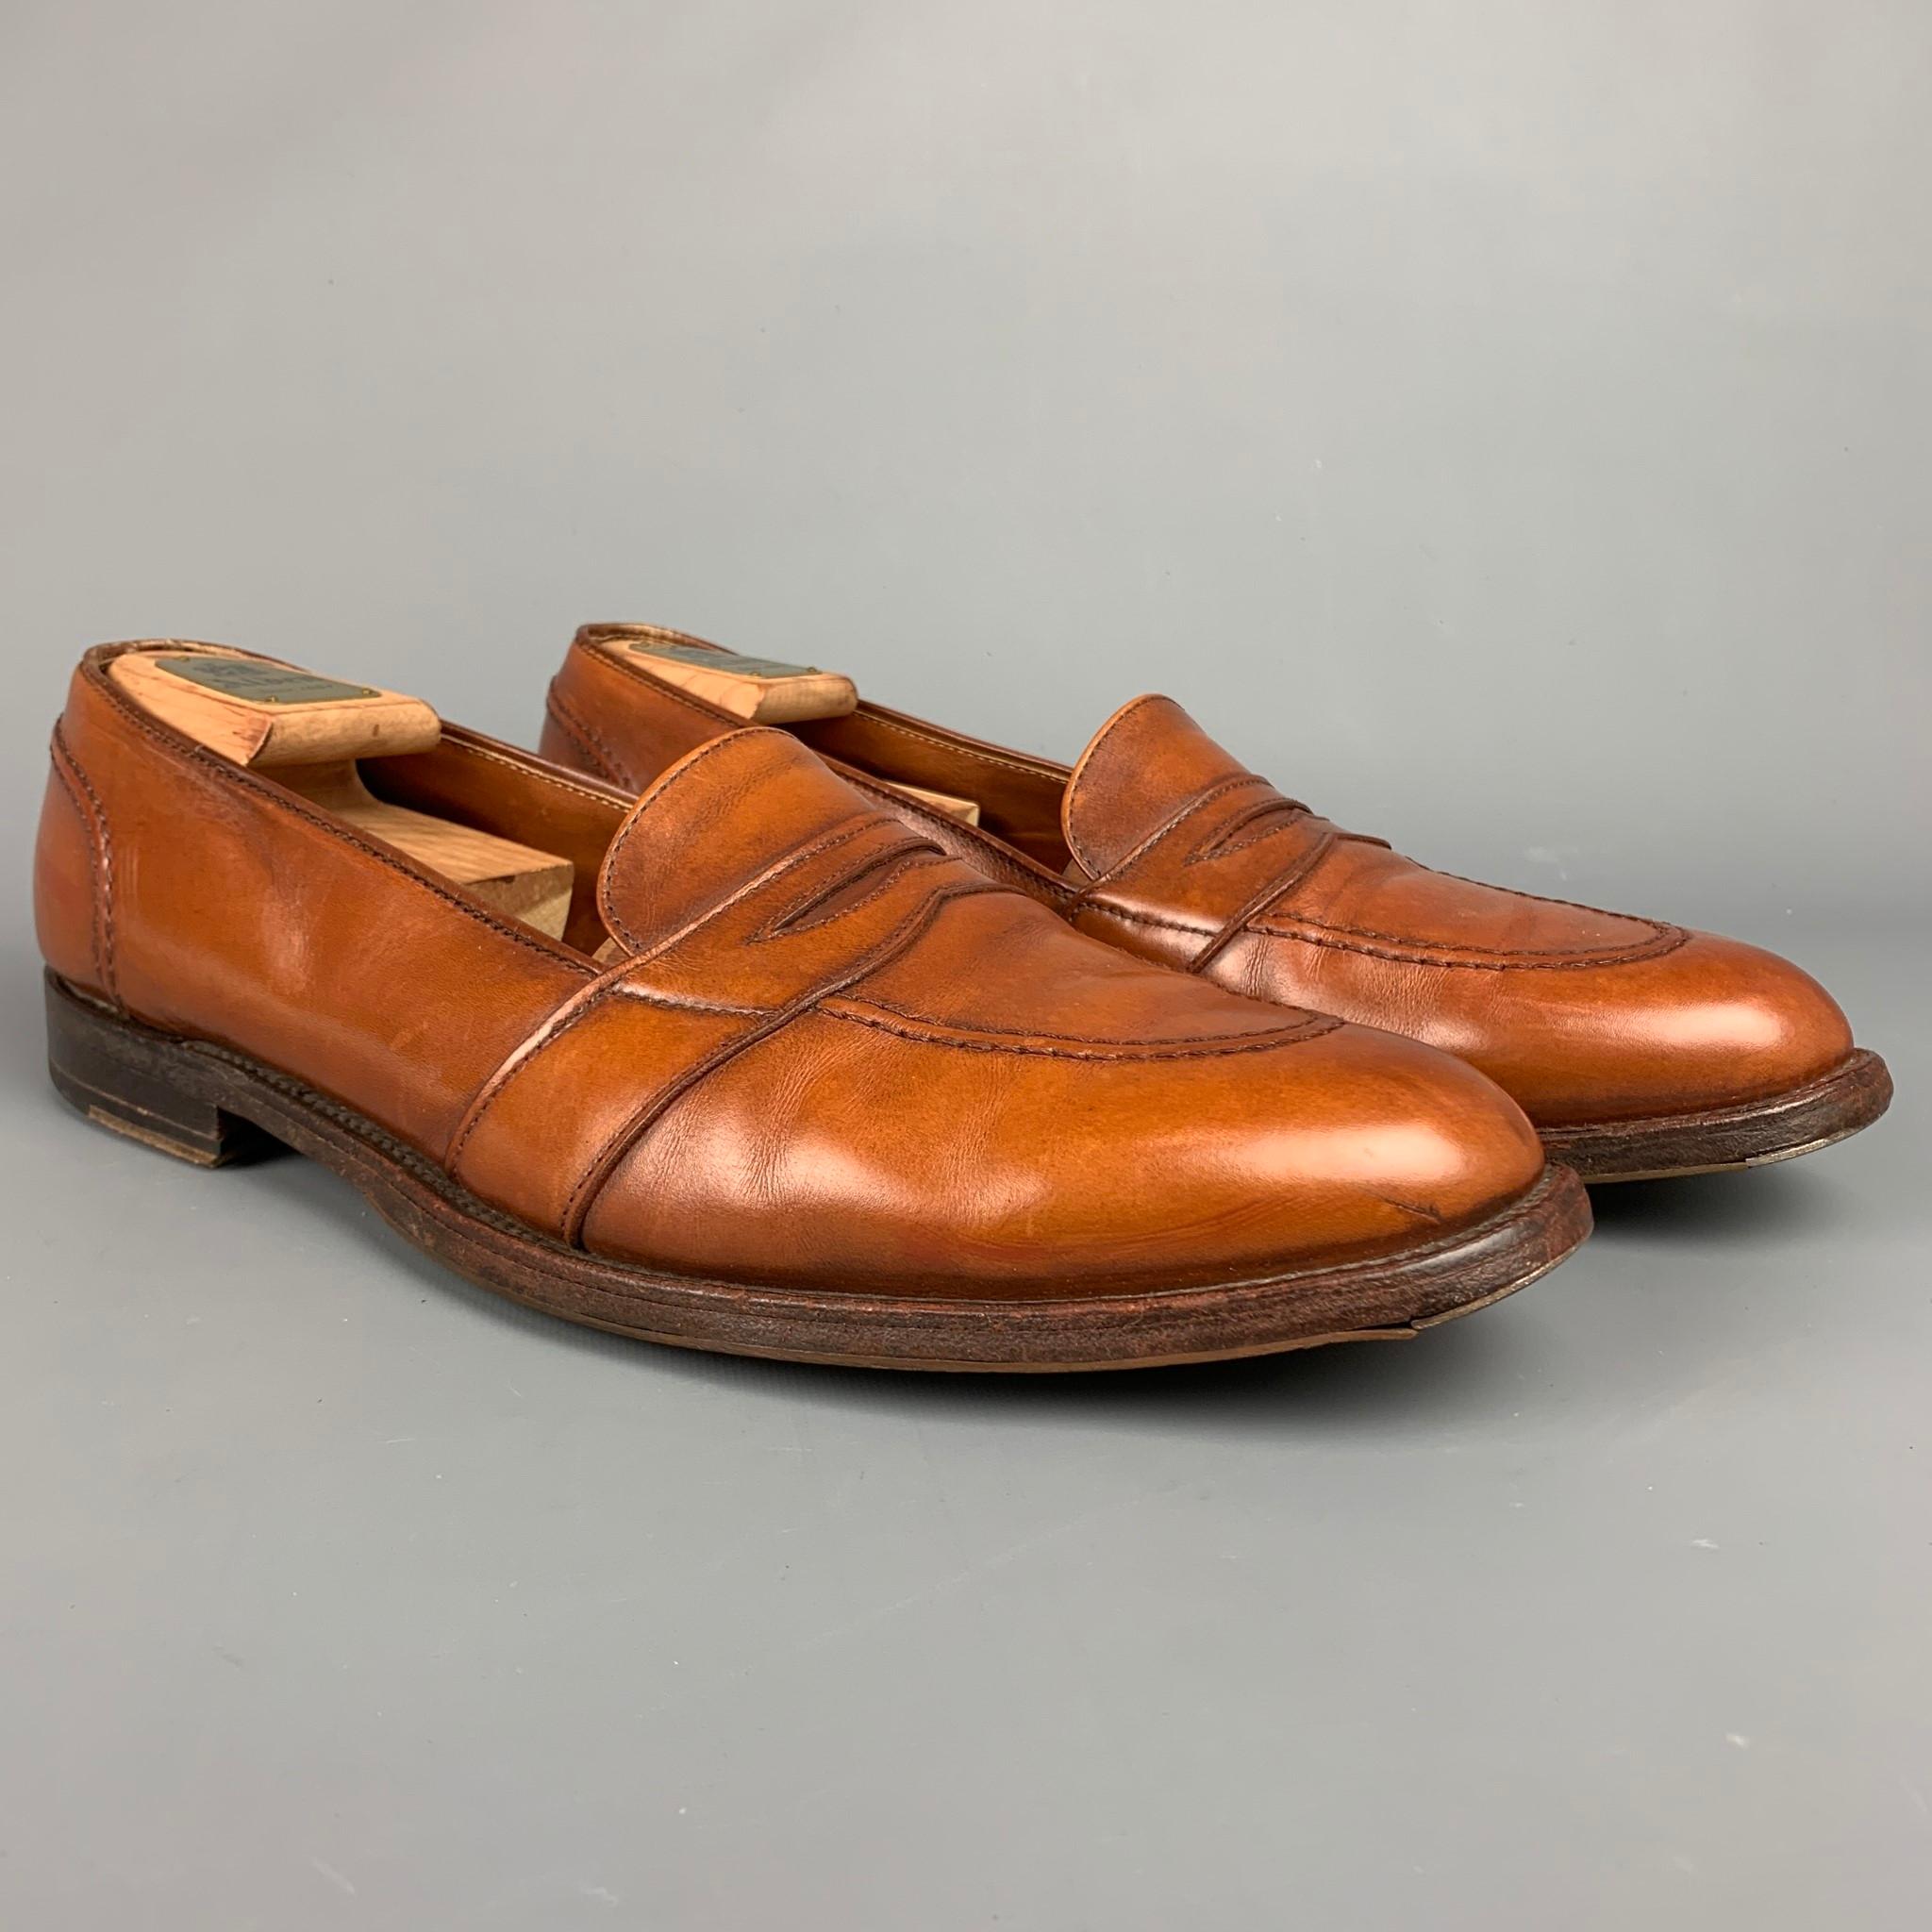 ALDEN loafers coms in a tan leather featuring a penny strap, cap toe, and a wooden sole. Comes with box and shoe tree. Made in England. 

Very Good Pre-Owned Condition.
Marked: 15 A / 685

Outsole: 13.5 in. x 4.5 in. 